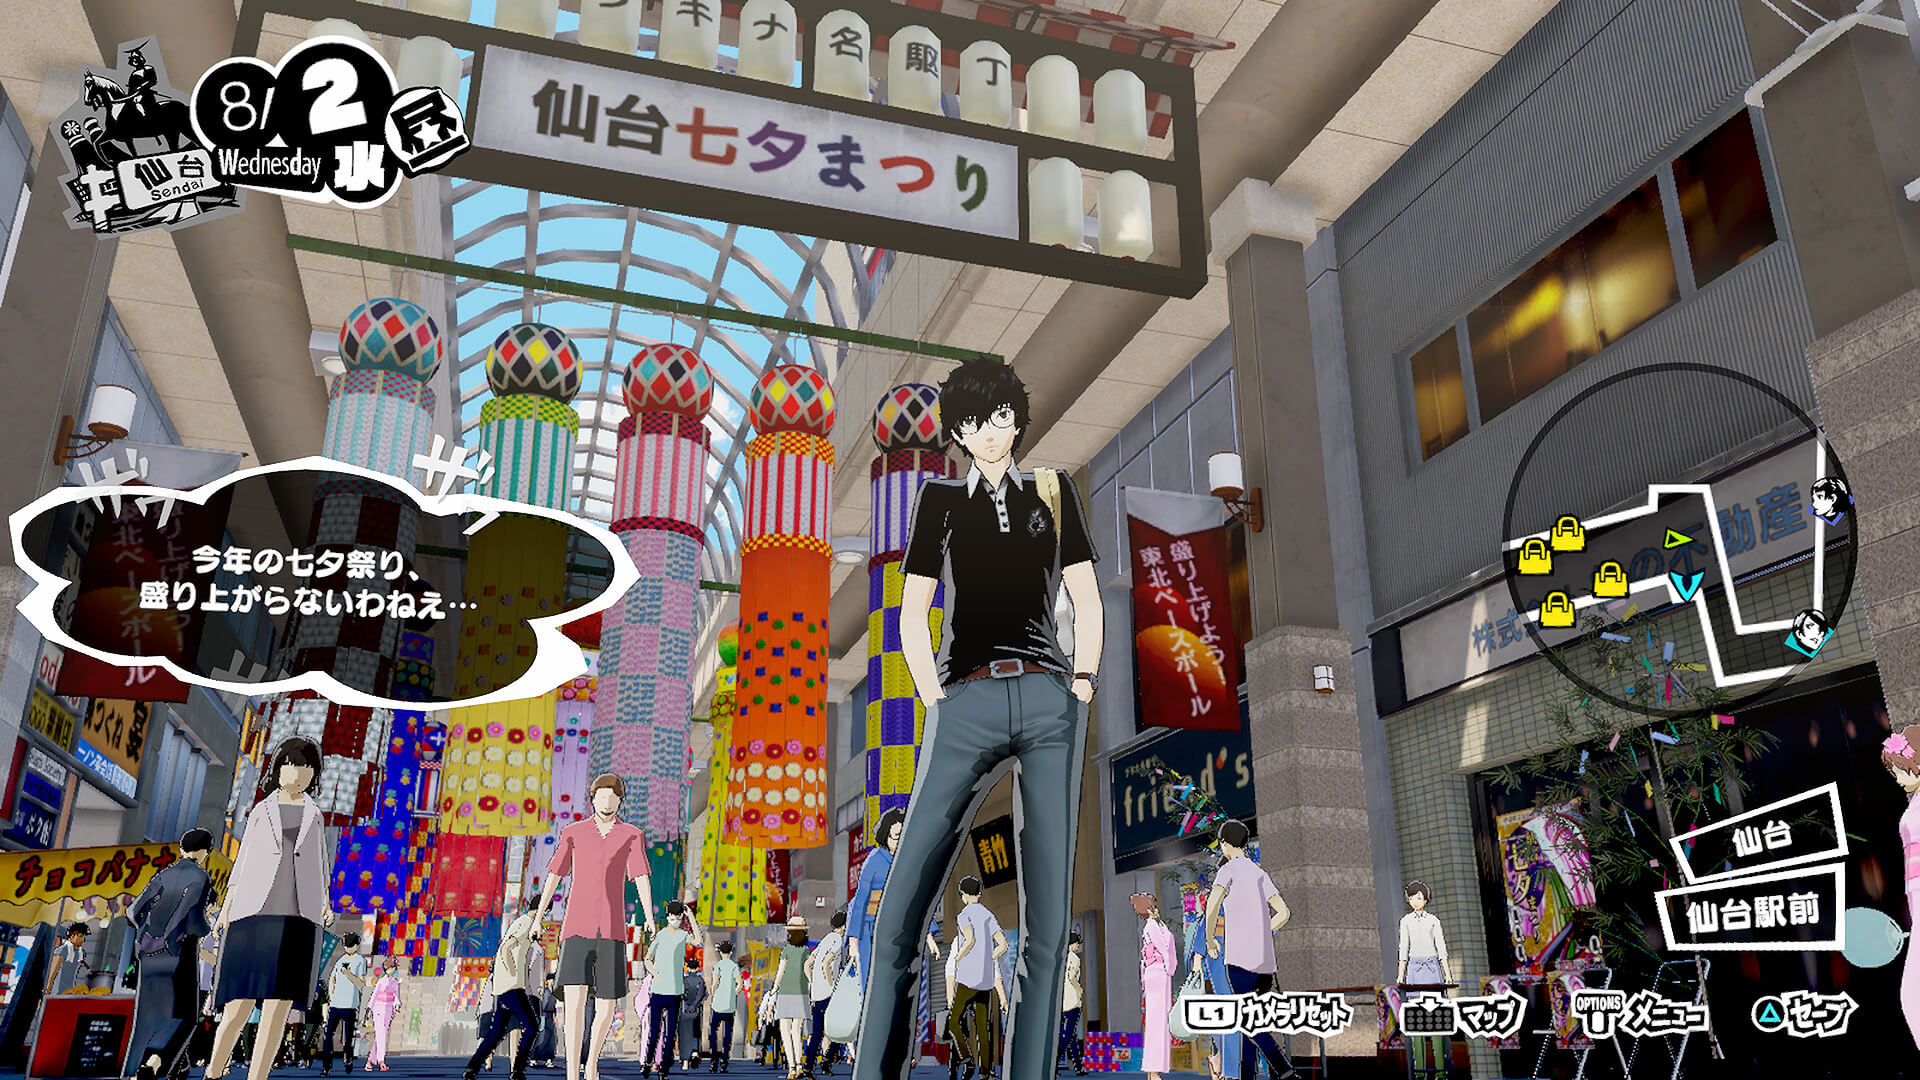 Persona 5 Scramble releasing on February 20th 2020 in Japan, new trailer and ...1920 x 1080